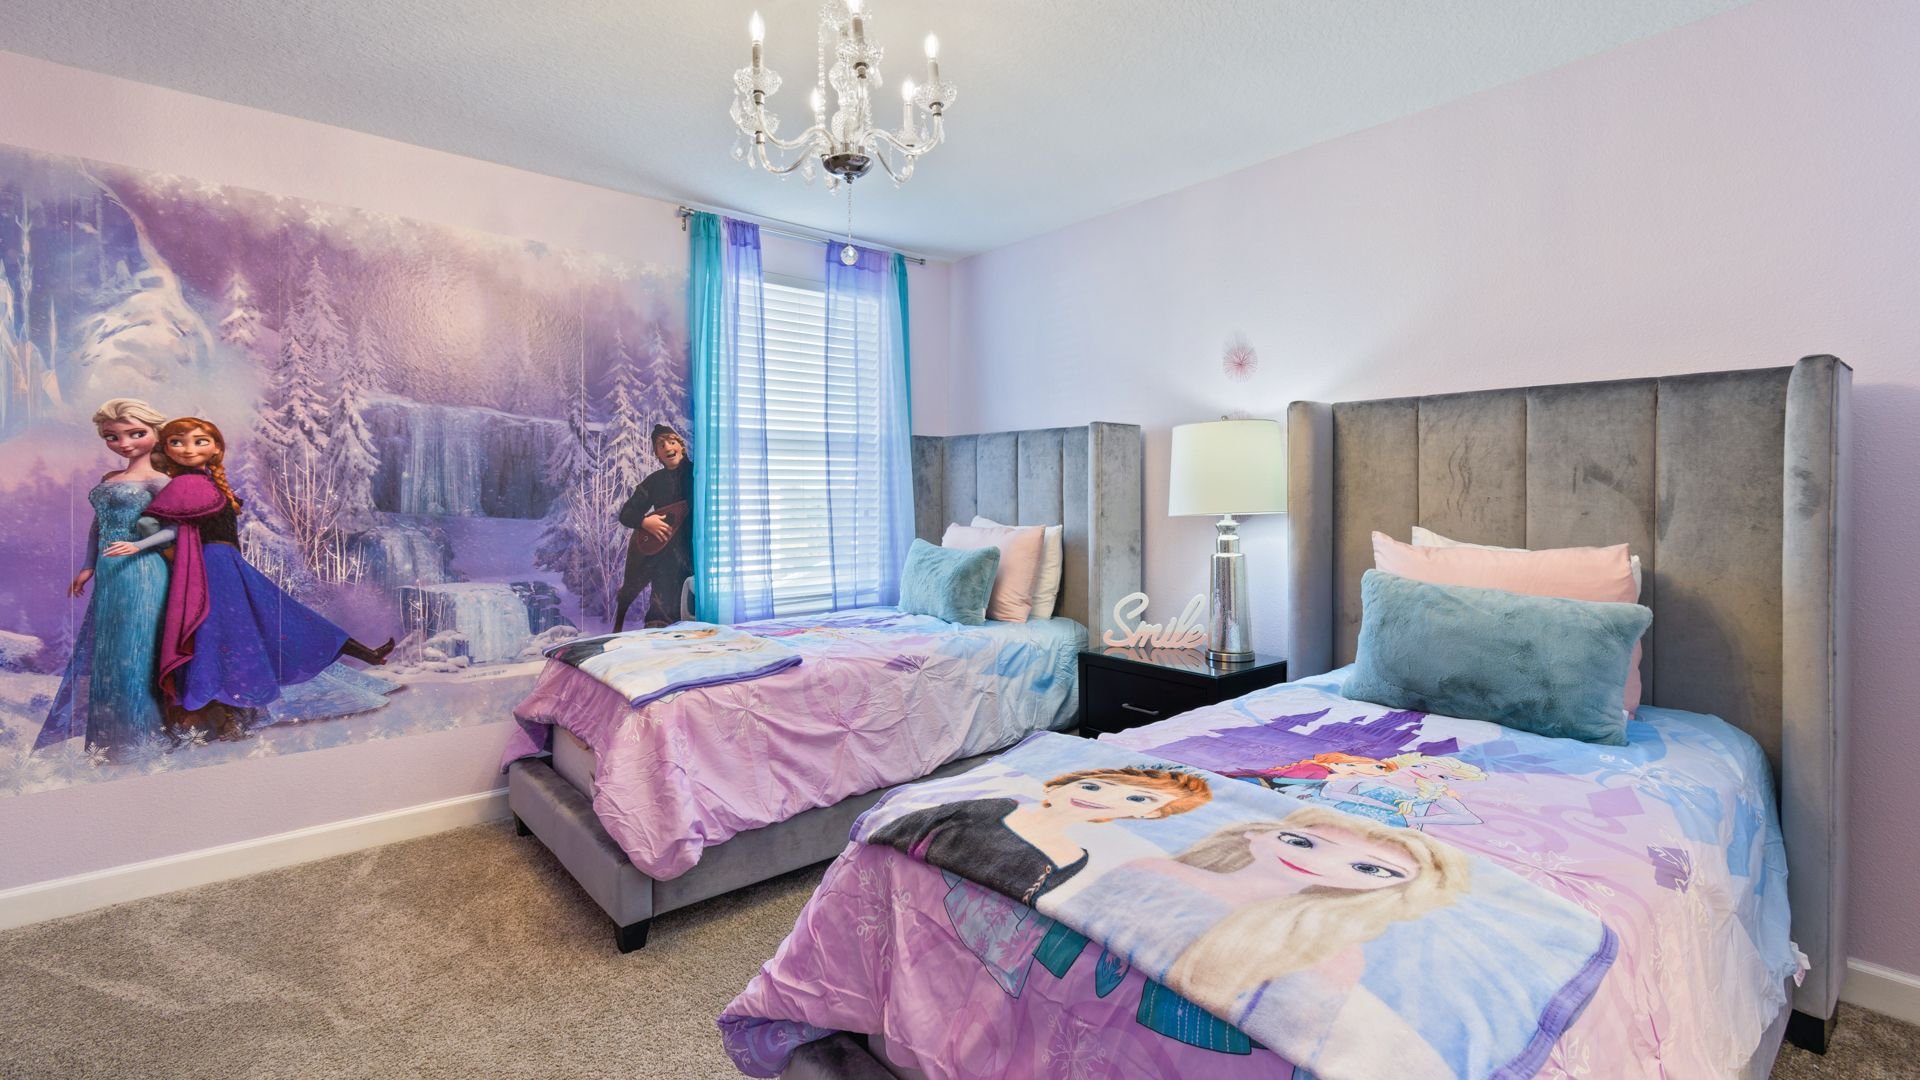 Two Twins Bedroom 6
Upstairs
Shared Bathroom
Frozen Theme